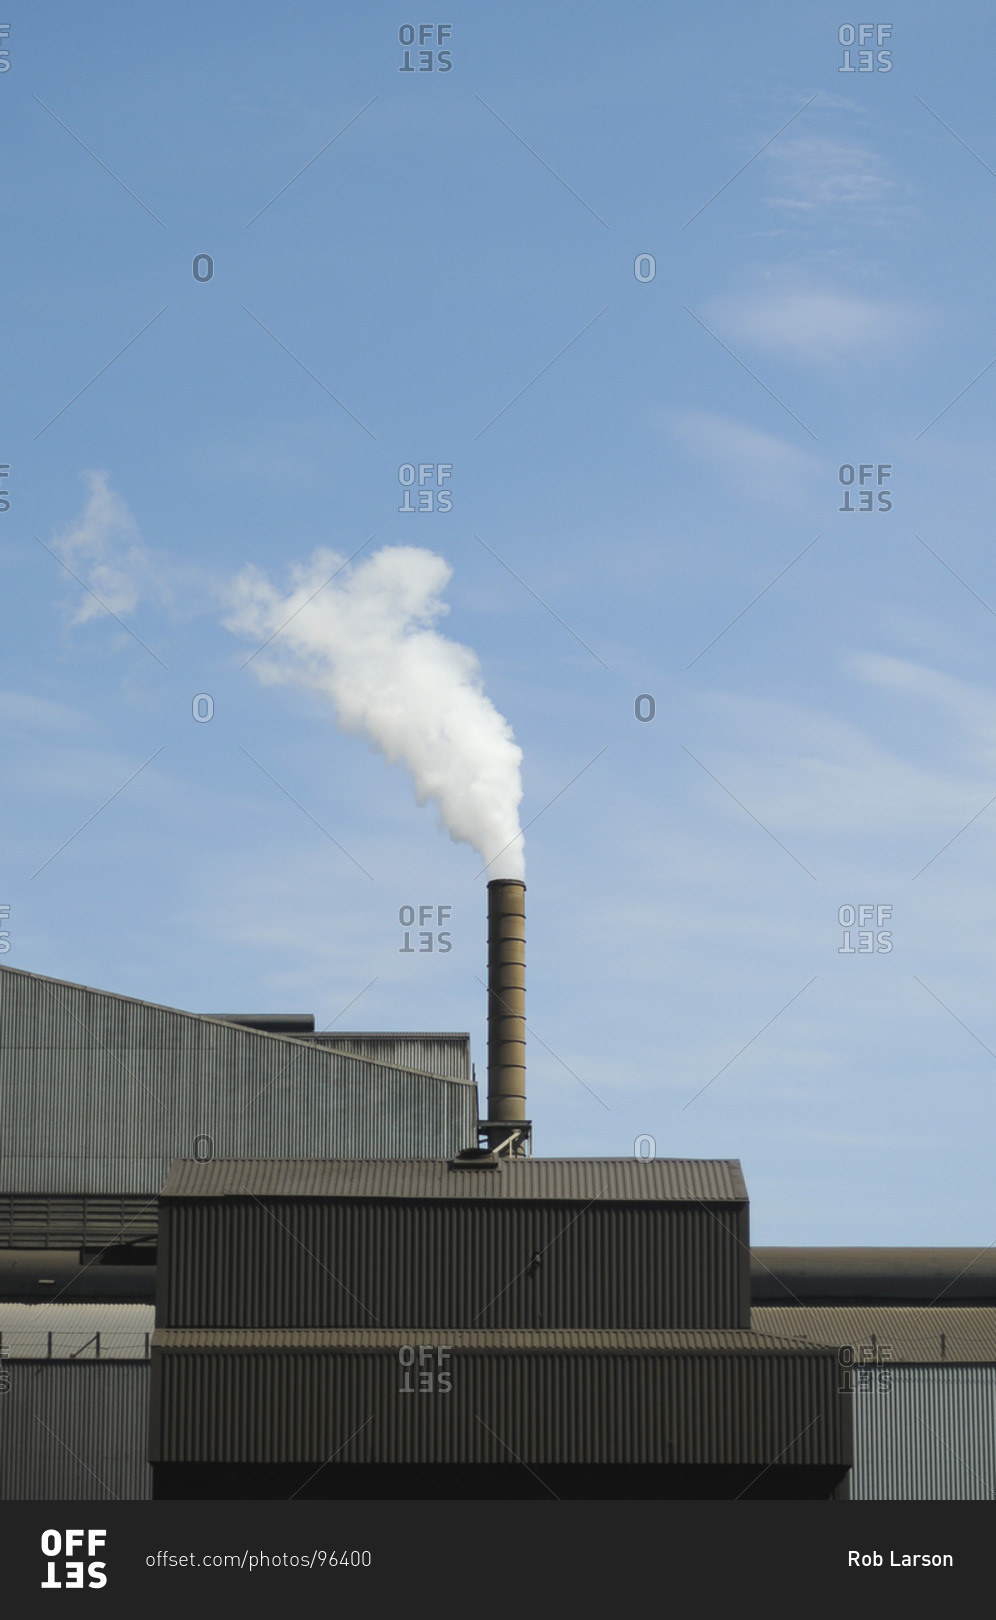 White smoke coming out of an industrial chimney